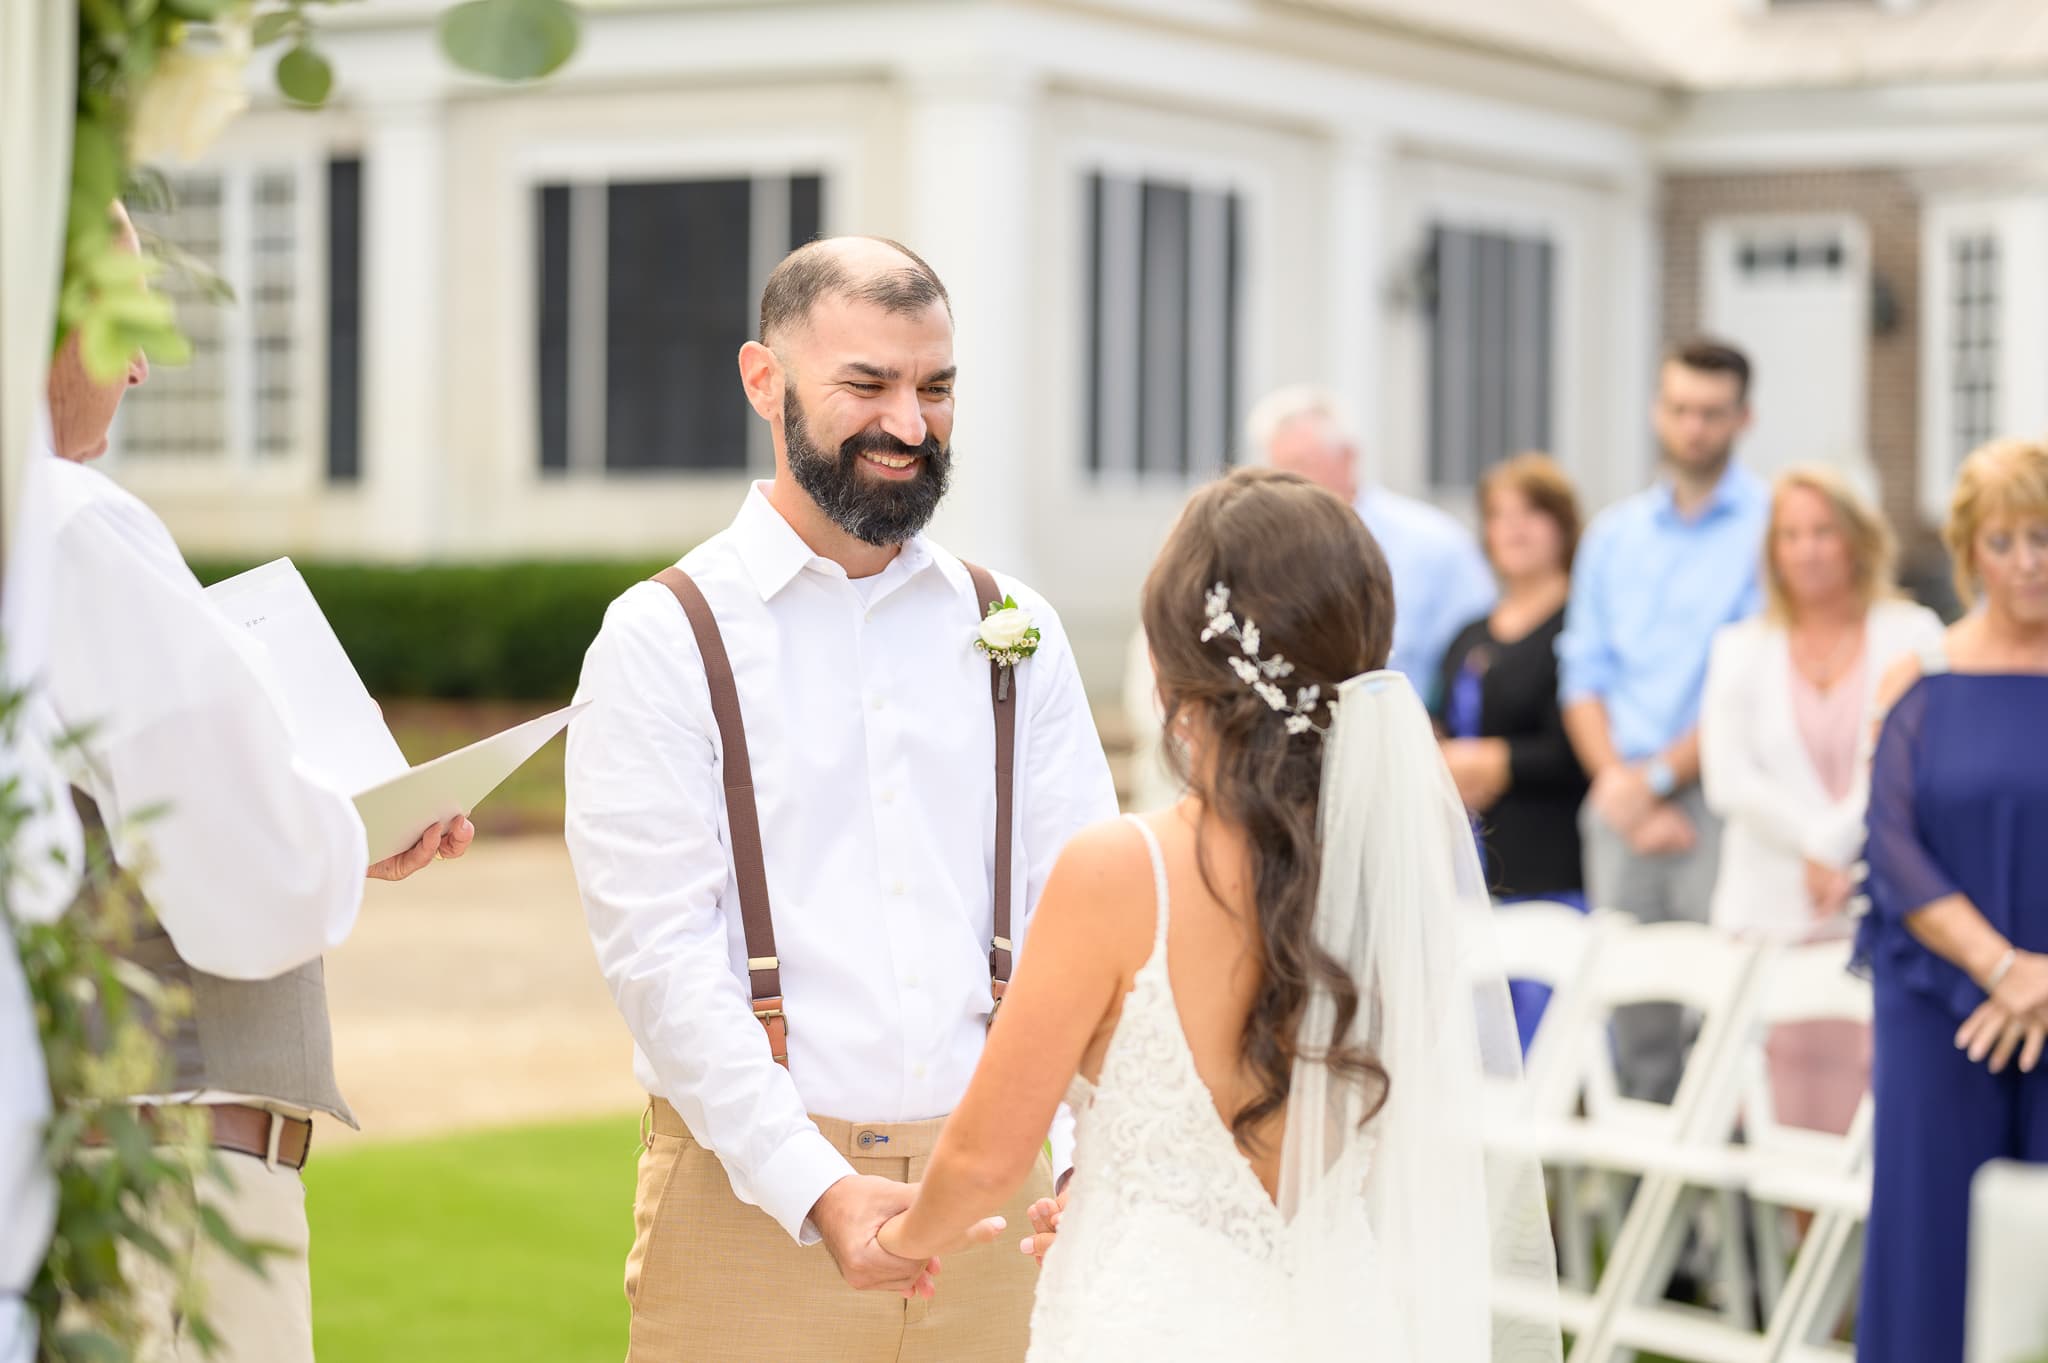 Groom smiling at bride during the ceremony - Pawleys Plantation